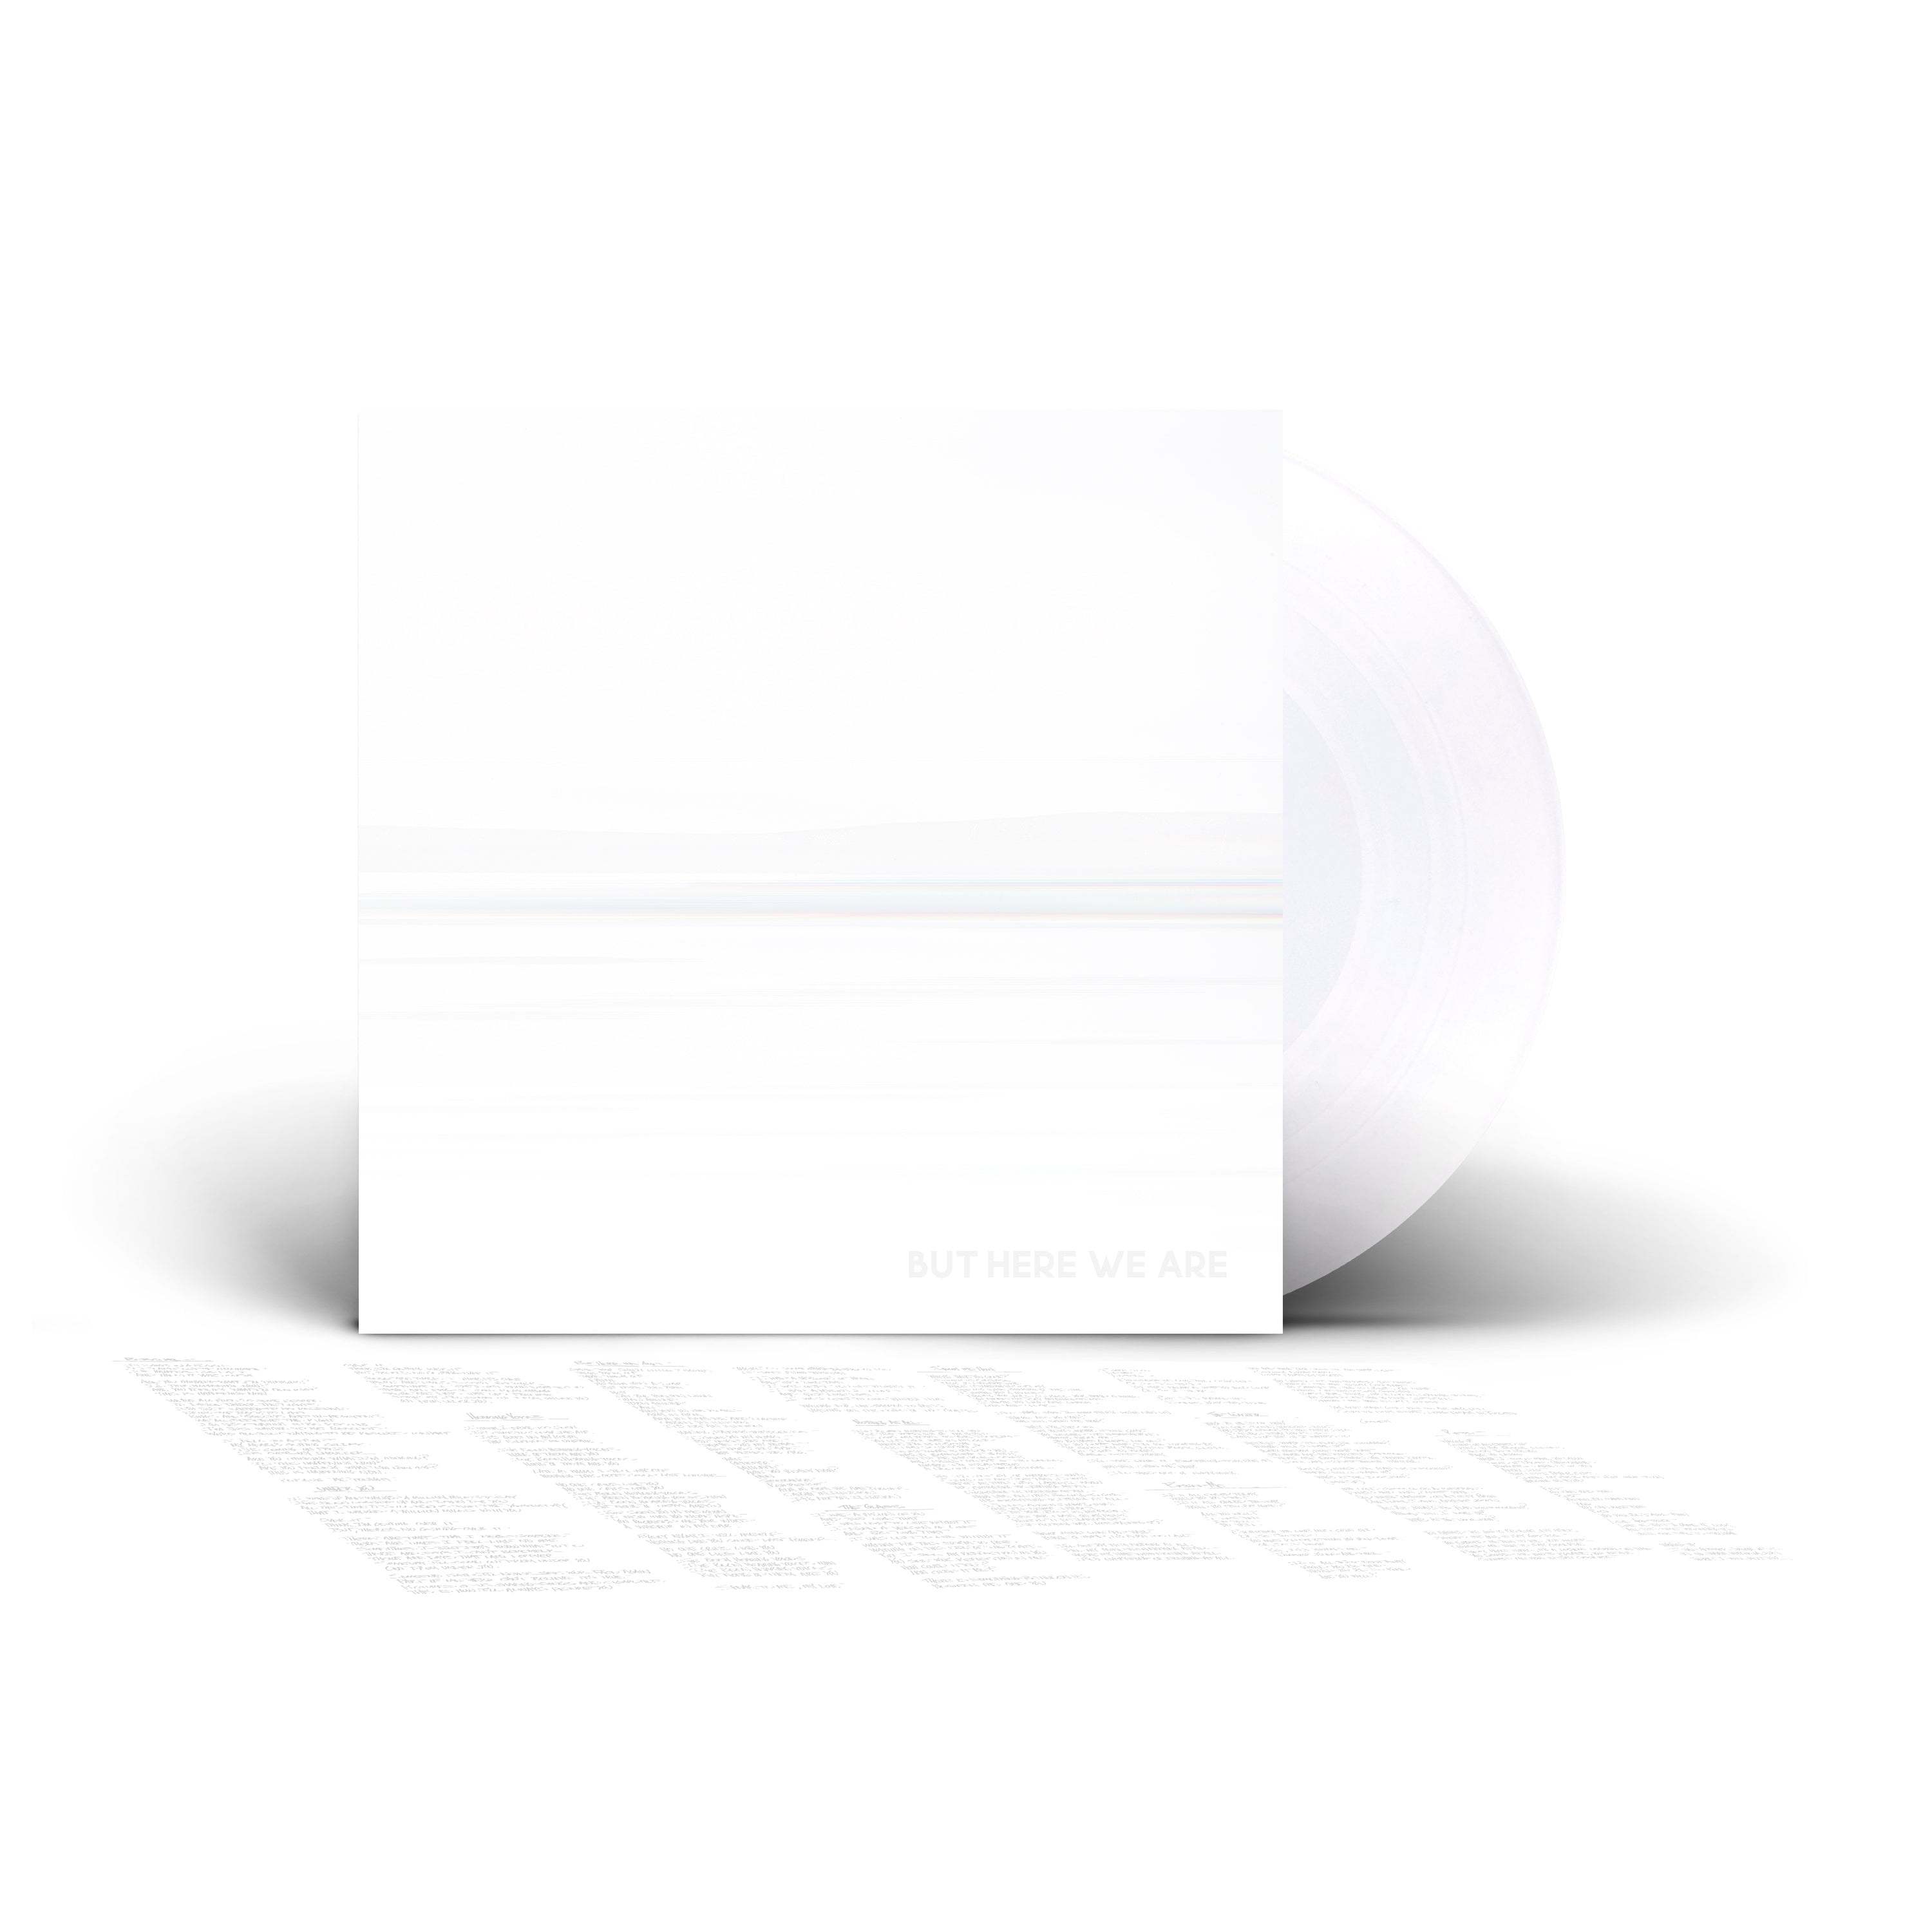 Foo Fighters- But Here We Are (White Vinyl) (PREORDER) - Darkside Records